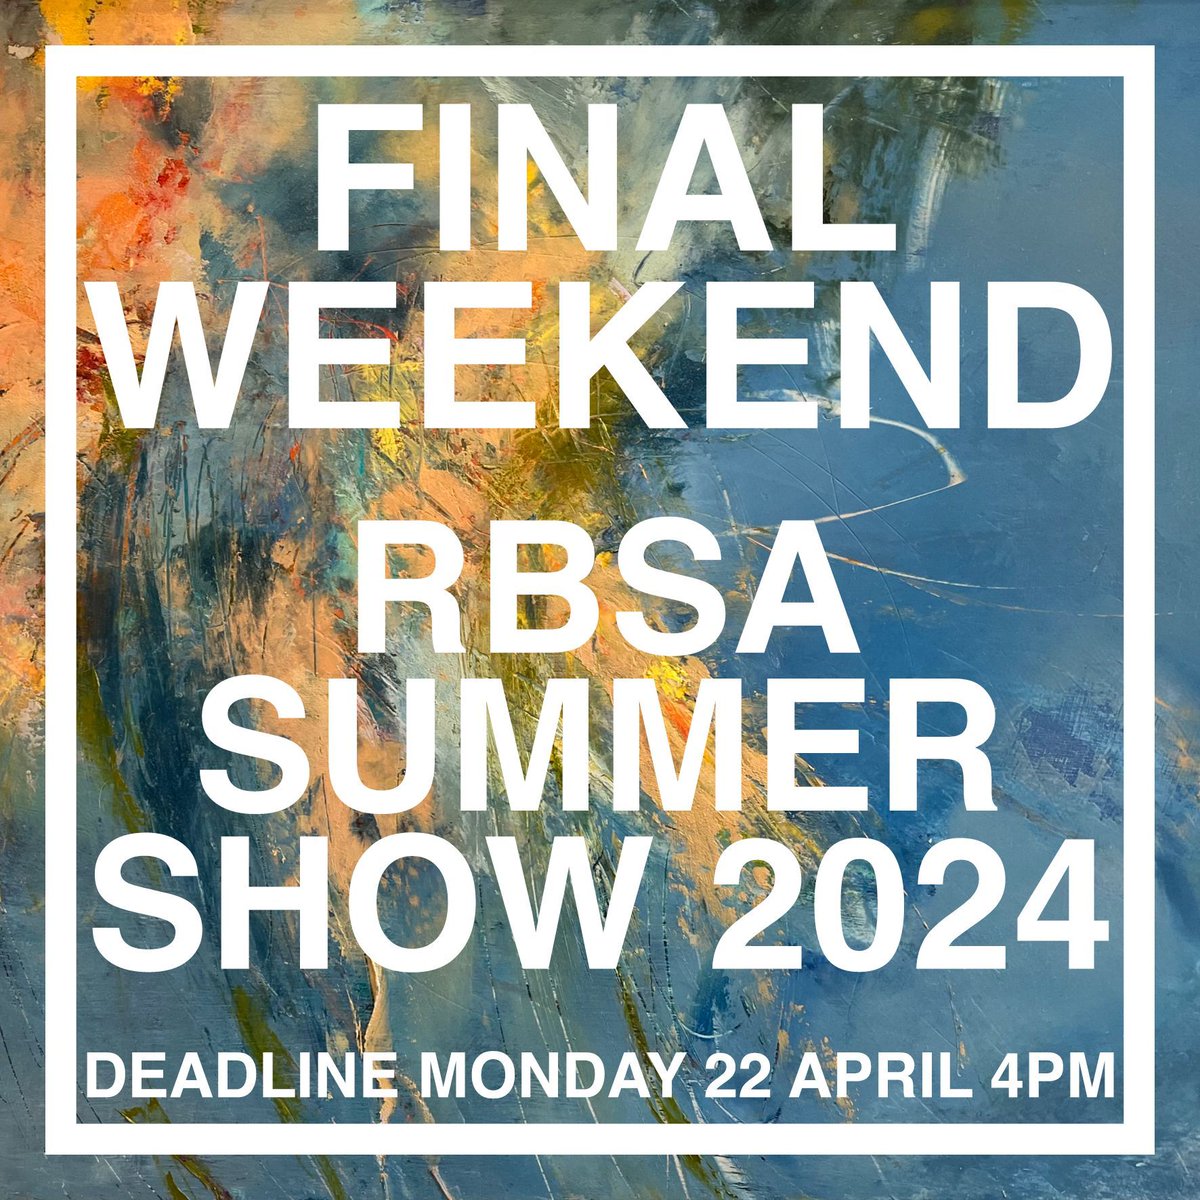 This is the final weekend for you to submit work for the RBSA Summer Show 2024, the deadline is Monday at 4pm. Artists working in any media can enter work and we welcome entries from artists based locally, nationally, and internationally. Visit bit.ly/4amCZzn to enter.